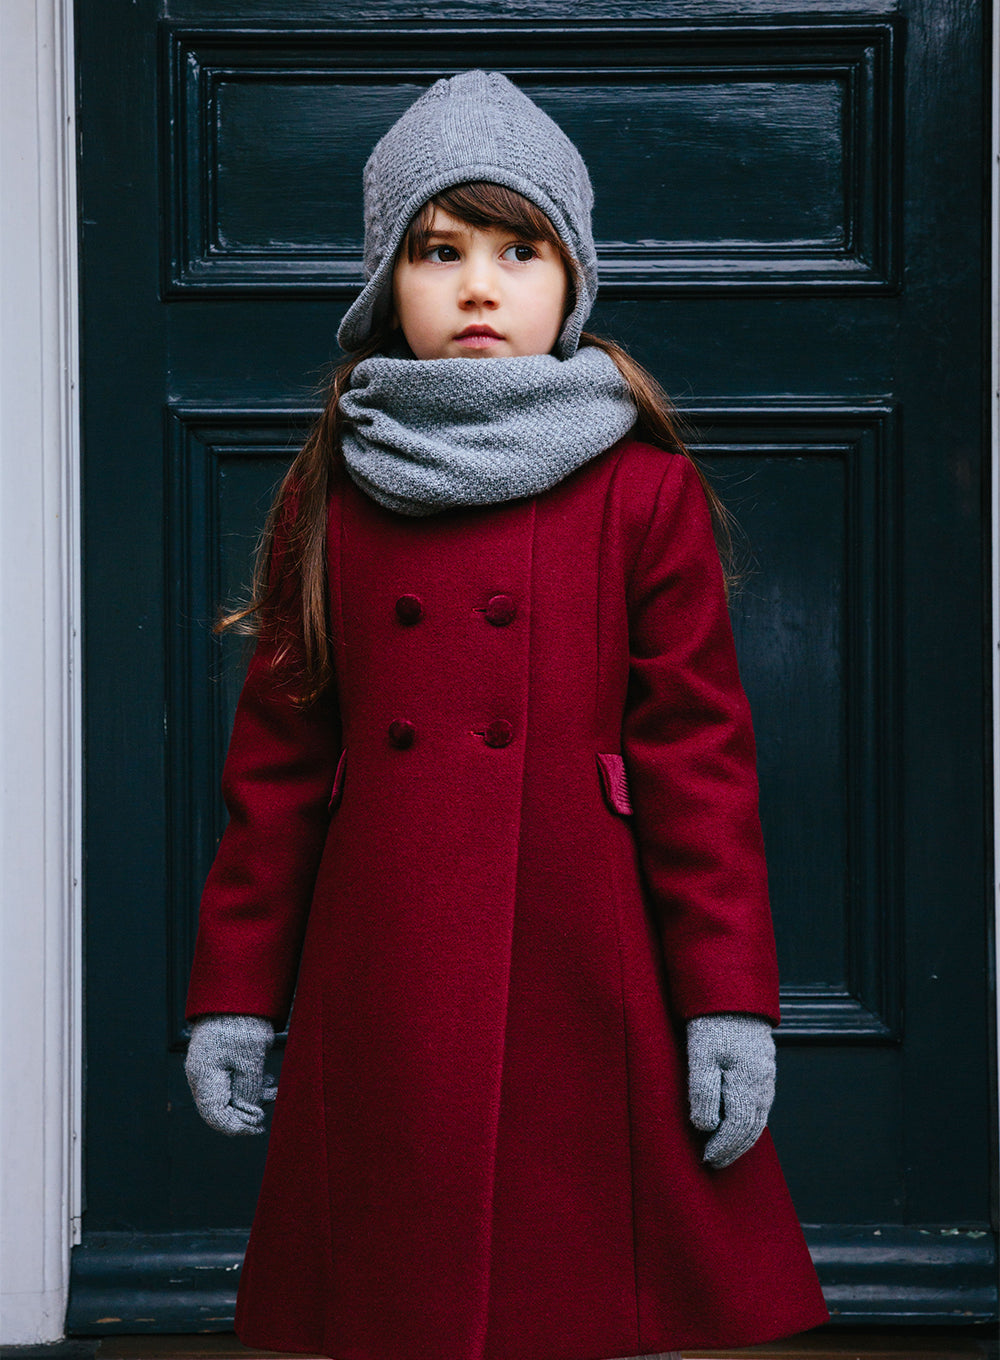 Trotters Heritage Girls' Classic Coat in Burgundy